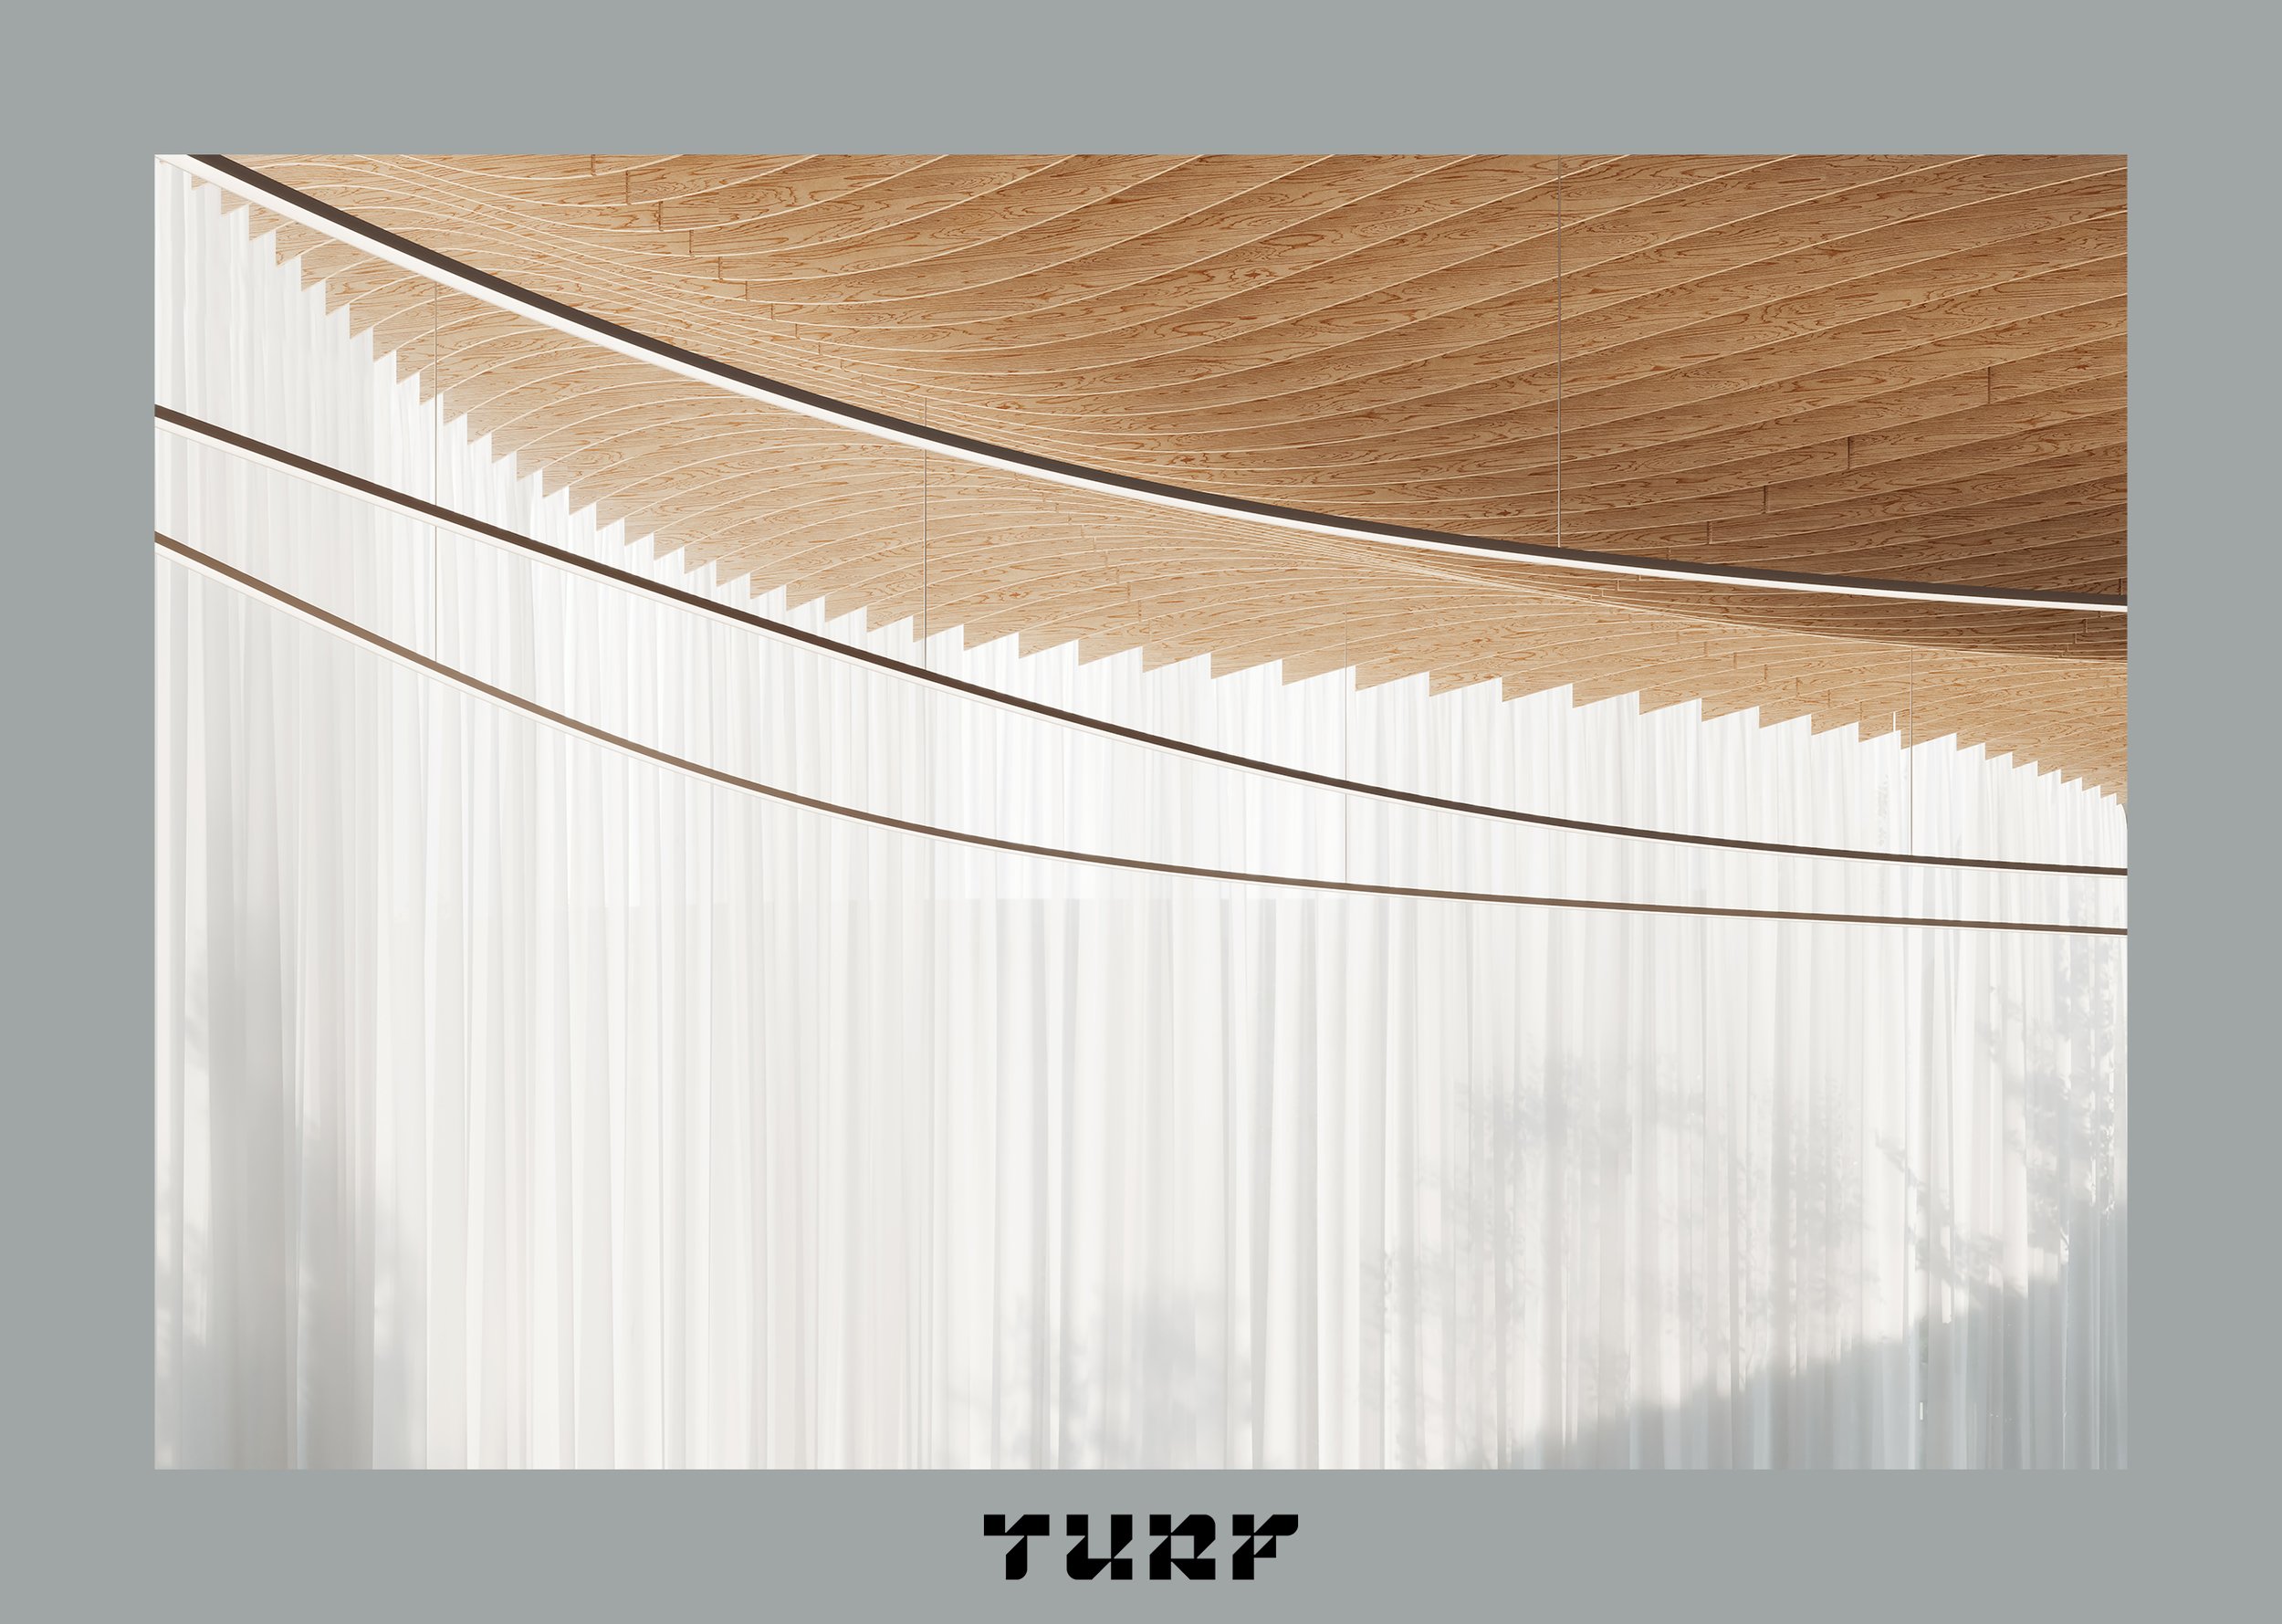   PRODUCT* TURF design (US)  Timber ceiling baffle images: © imperfct* 